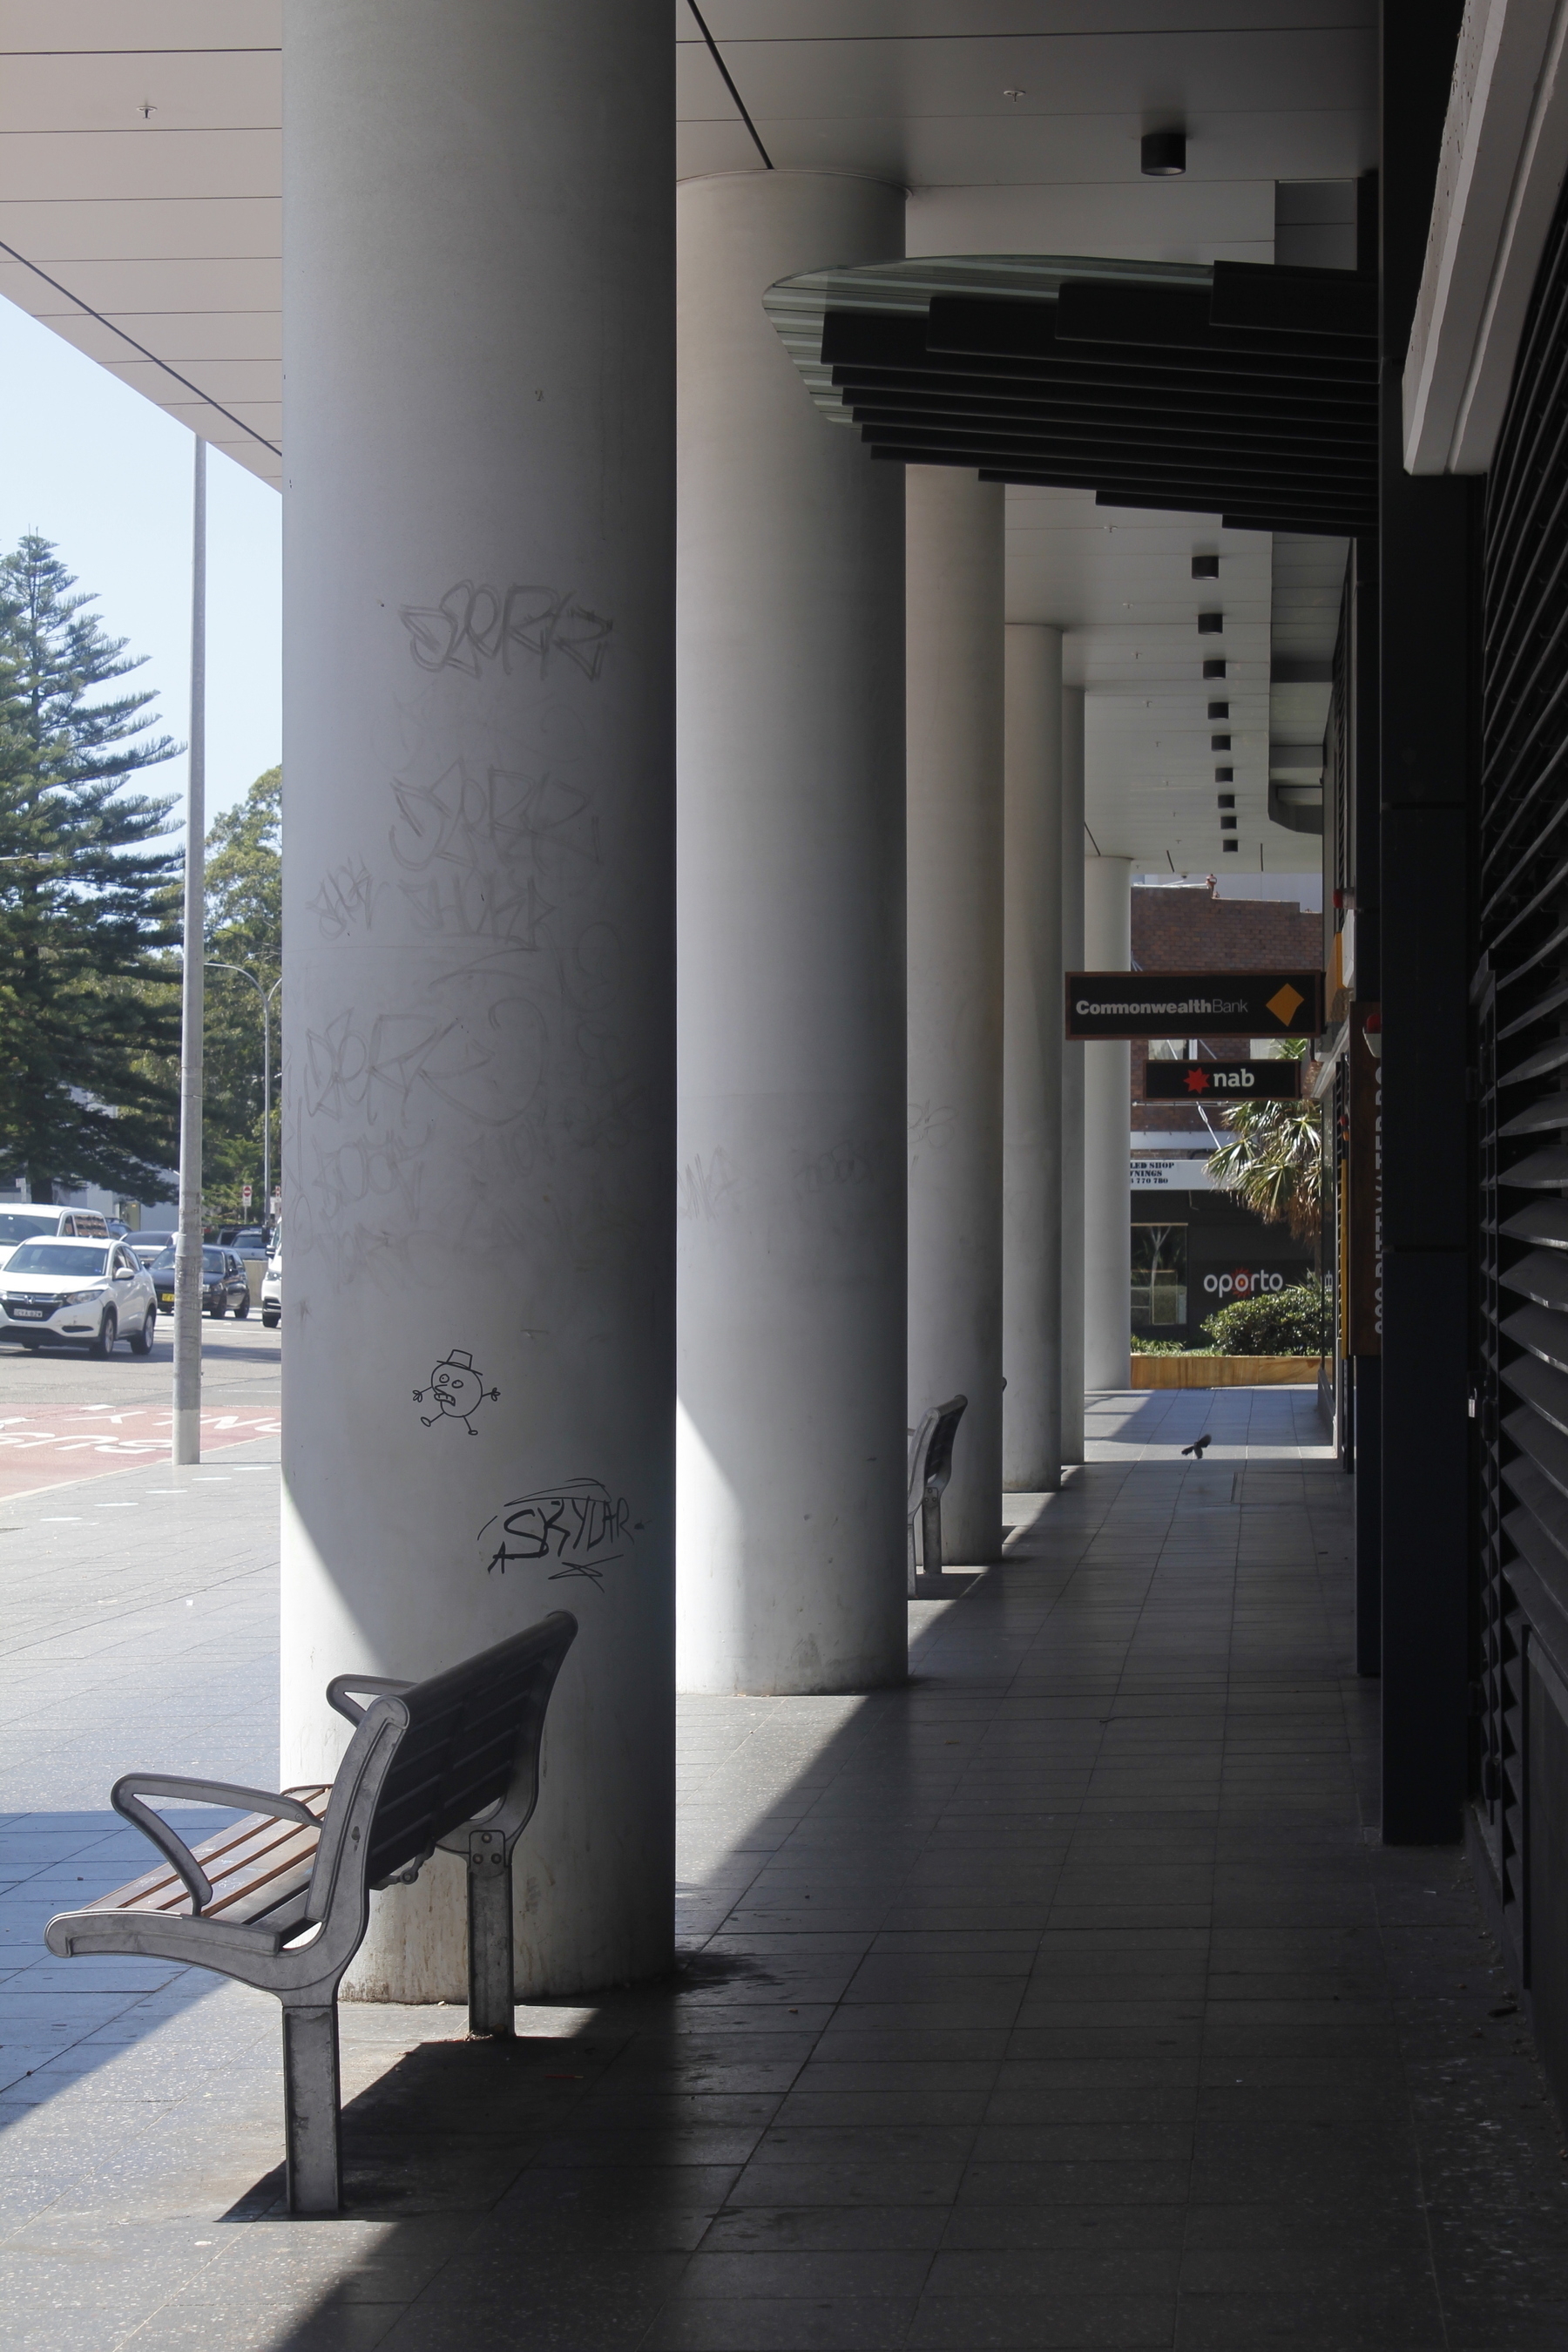 A line of very thick white columns runs into the middle distance, with a roof projecting out over the tops of the columns, on the left. To the right of the columns is a long stretch of tiled footpath and the external wall of a commercial building, both in deep shade. To the left of the columns is hot, bright, glaring sunshine and a glimpse of cars on a main road with trees in the background.